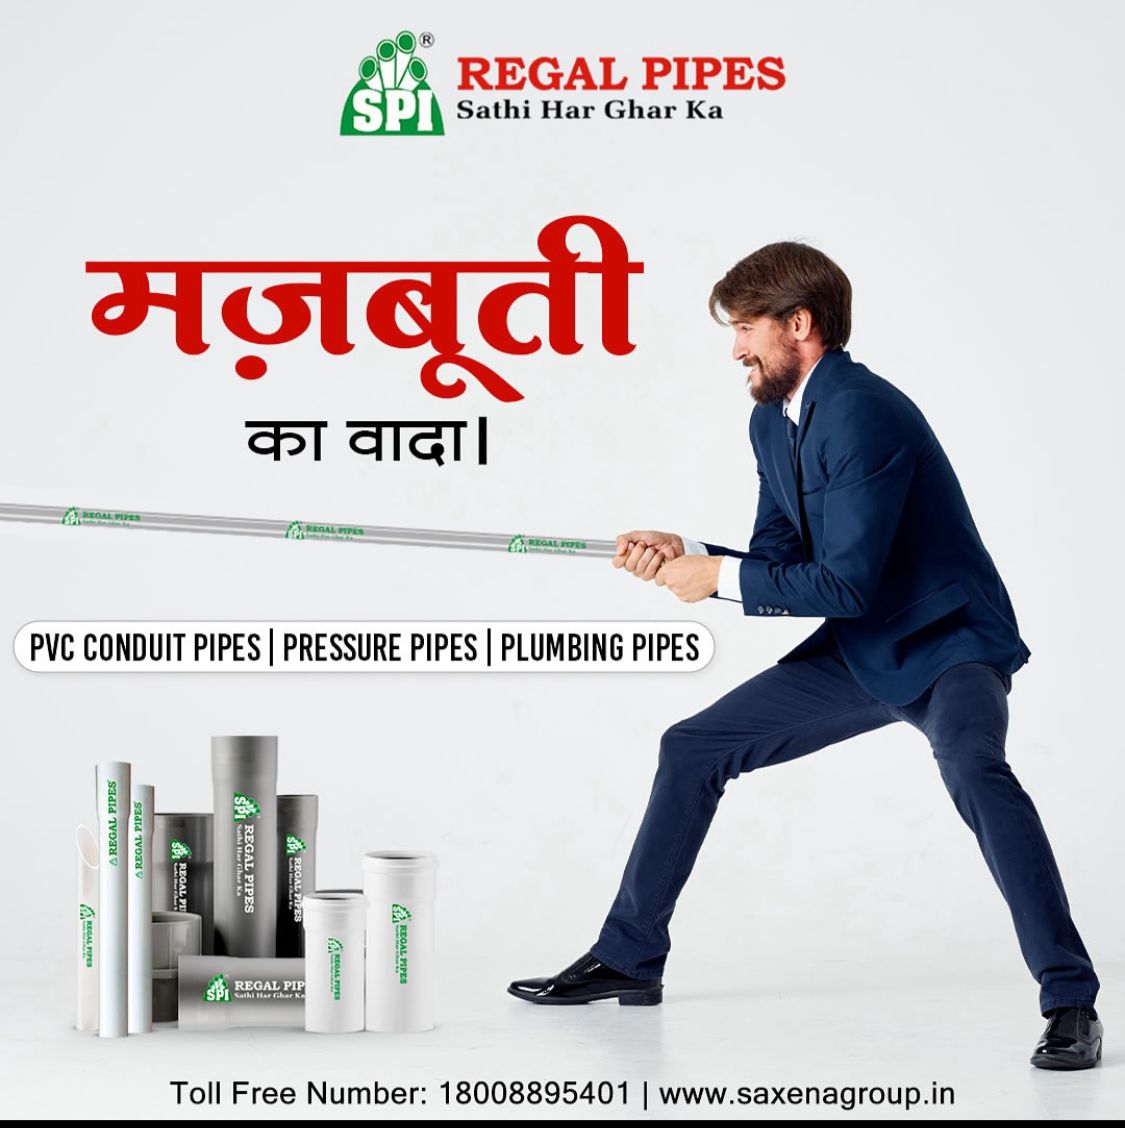 Unbreakable Pipes | Saxena Plastic Industries  | PVC PIPE IN NALAGARH , BEST PIPES , STRONG PIPES , UNBREAKABLE PIPES , REGAL PIPES , PRESSURE PIPES , CONDUIT PIPES  - GL116885